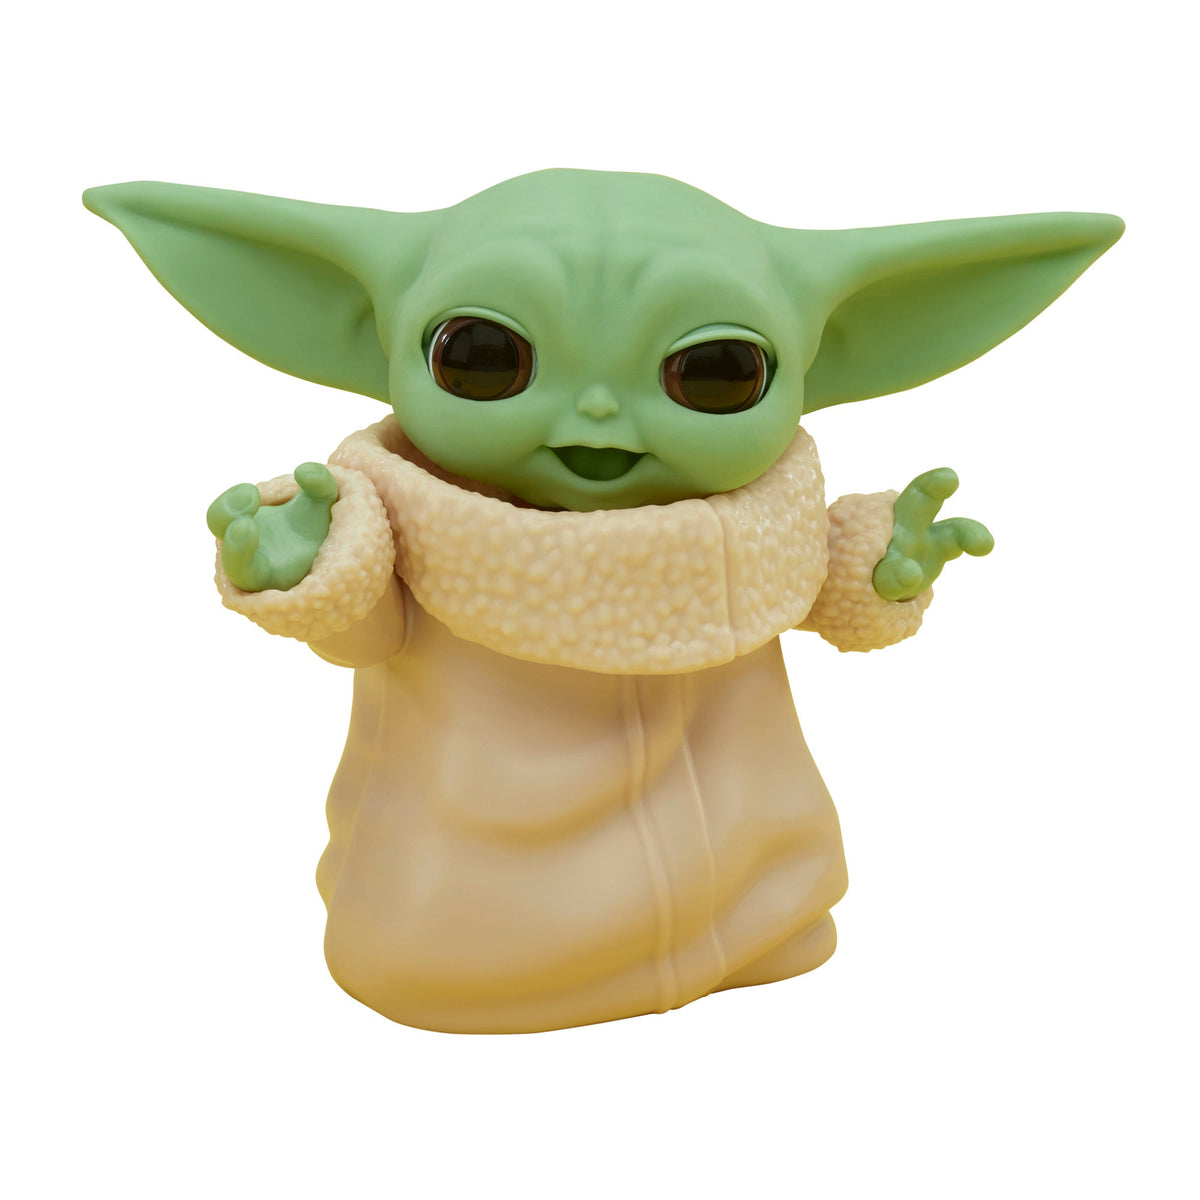 Star Wars' Fans Are In Love With the New Upgrades For Grogu in